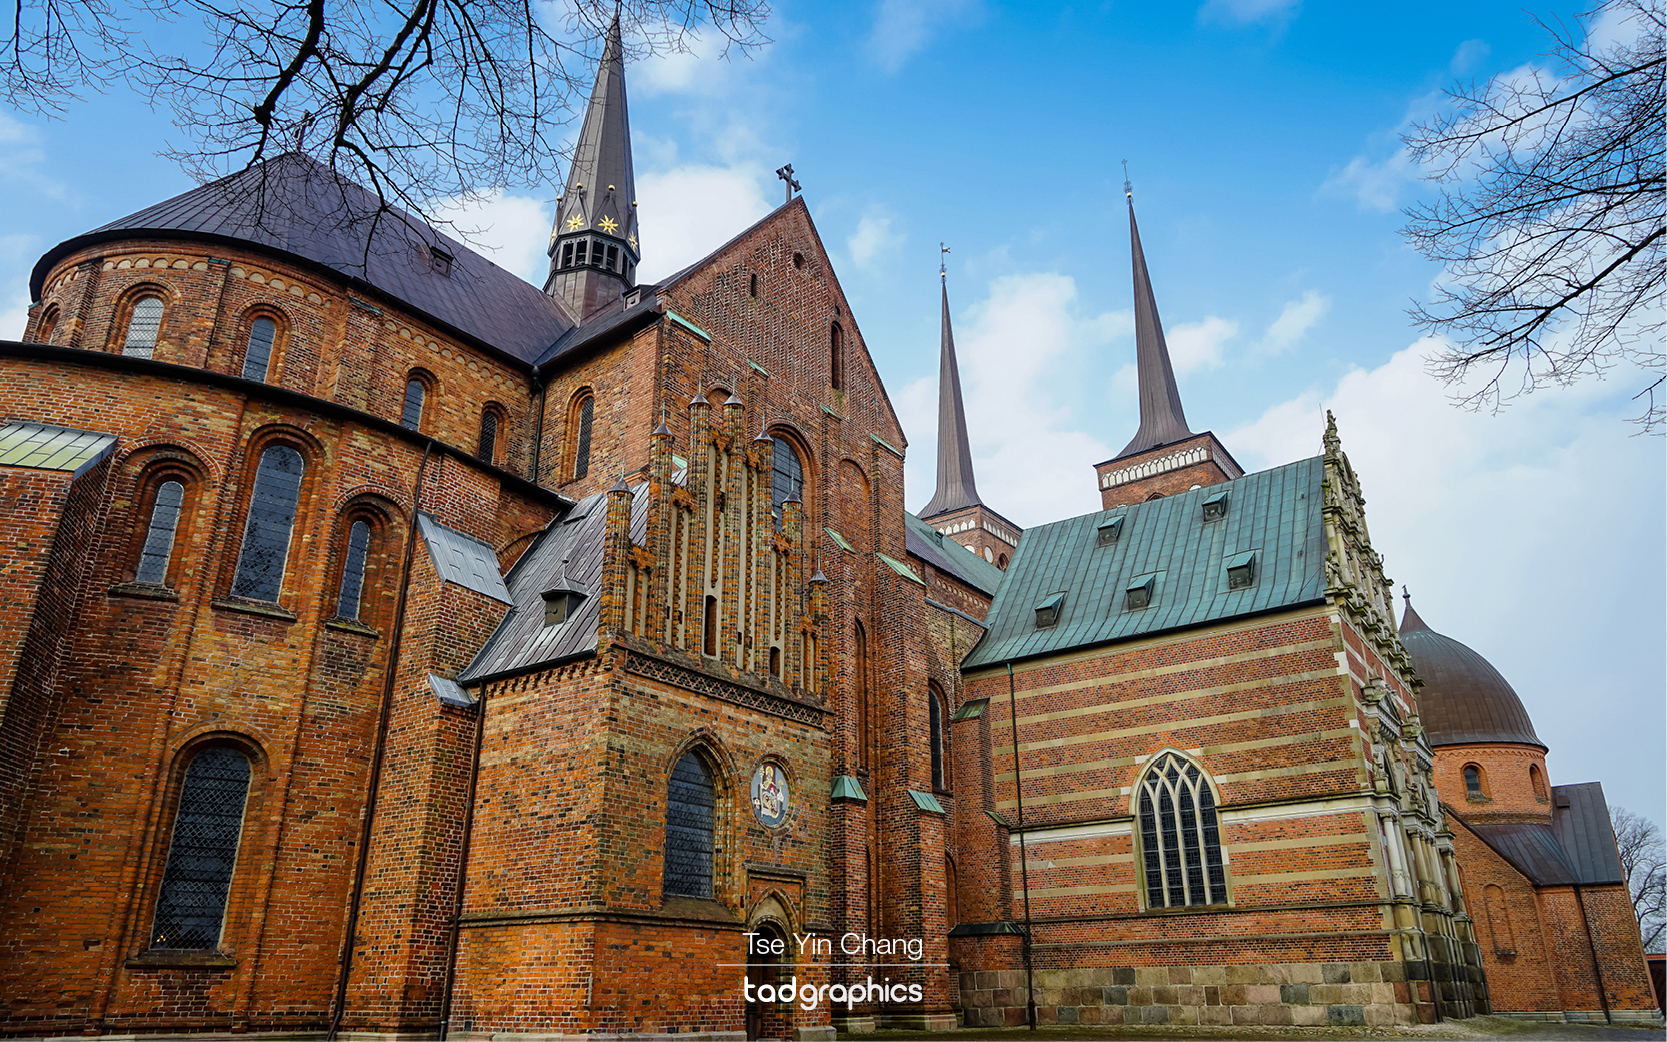 Roskilde Cathedral is the country’s most important religious building where the royal family have been buried here since the 1400s